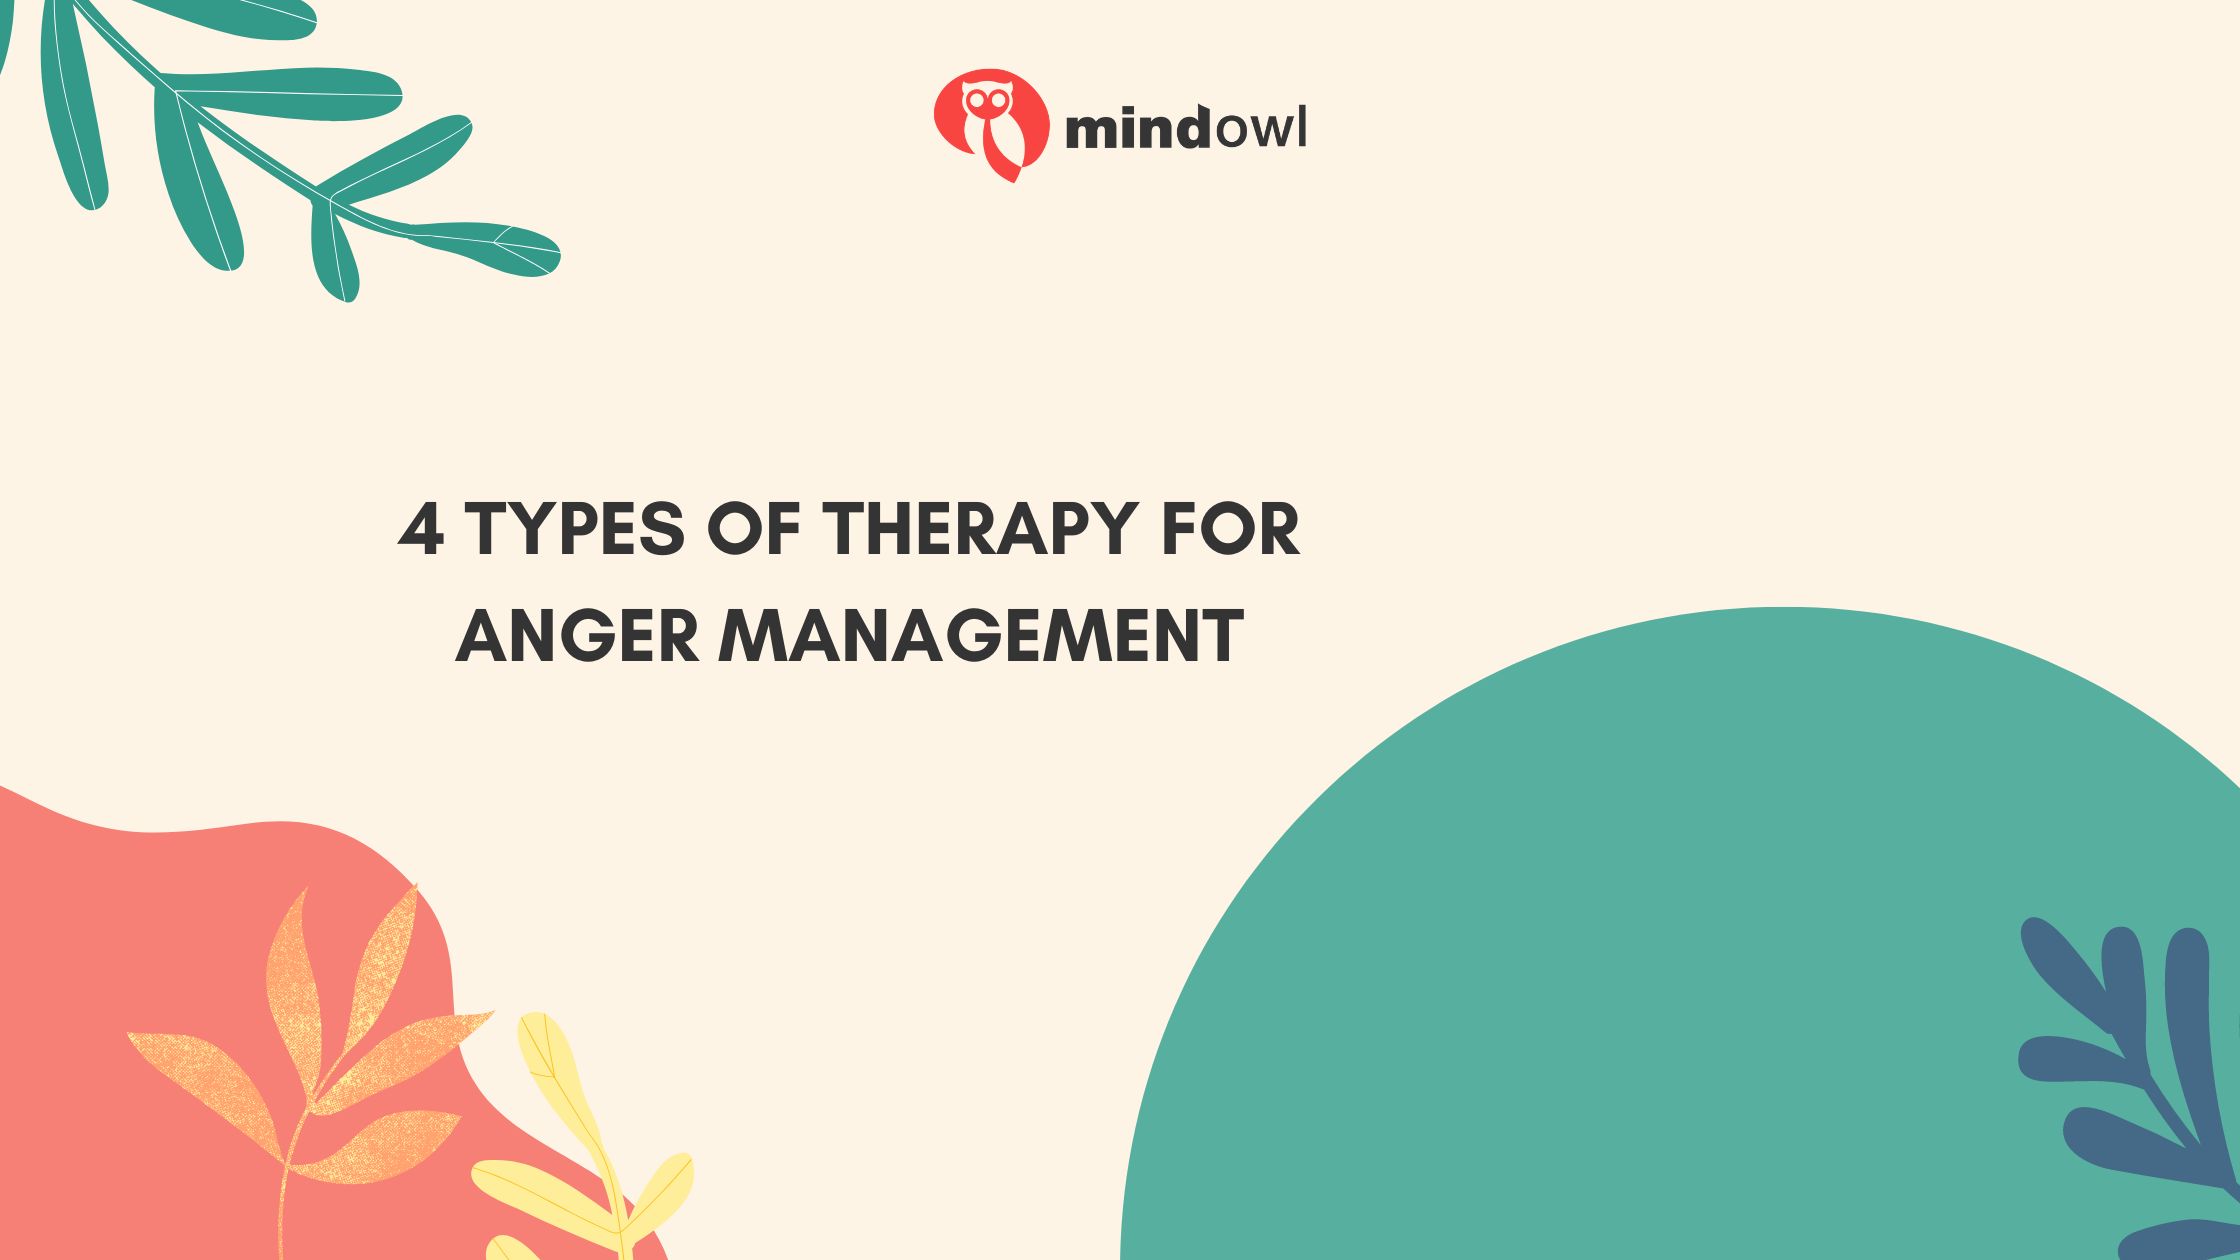 4 Types of Therapy for Anger Management